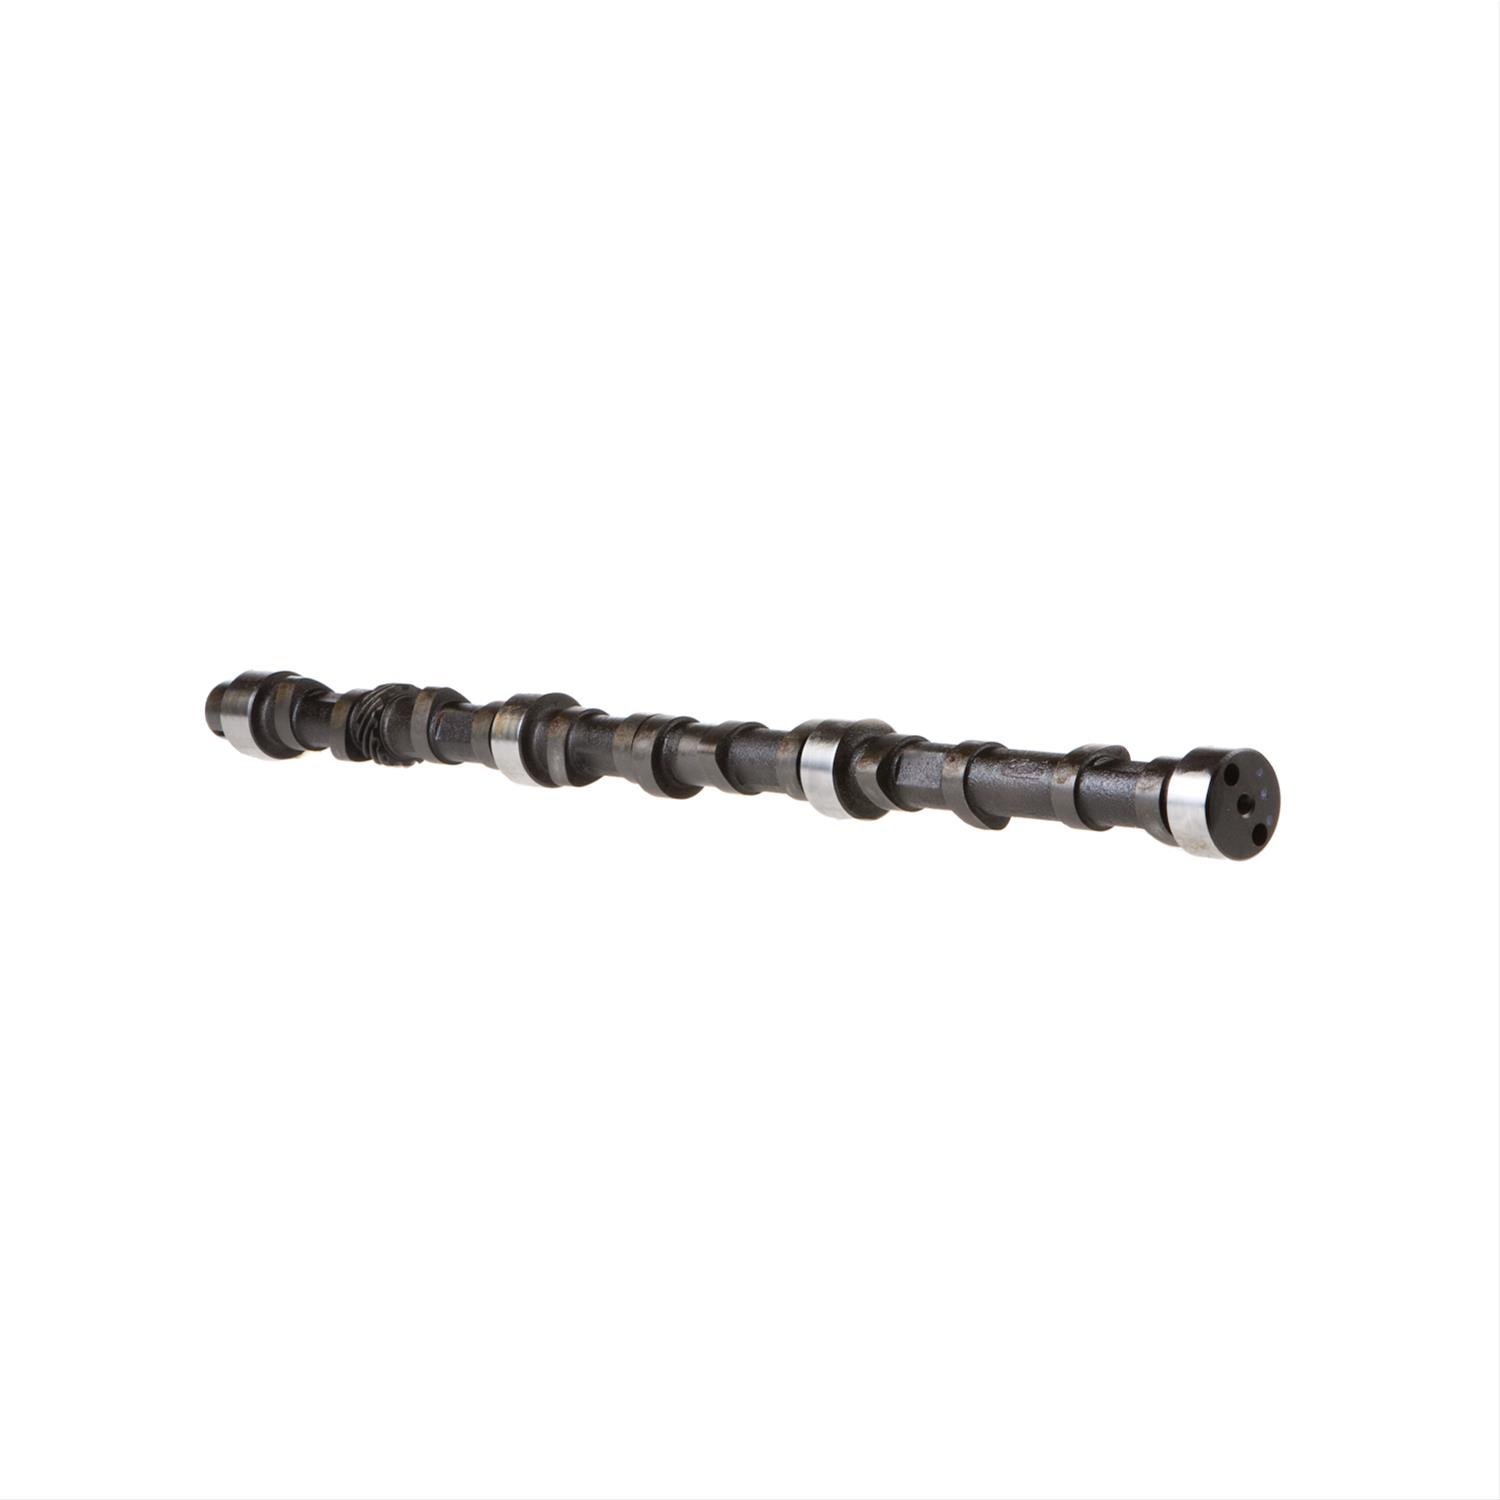 OEM Replacement Camshaft for 1963-1989 GM 4.8L L6 Engine